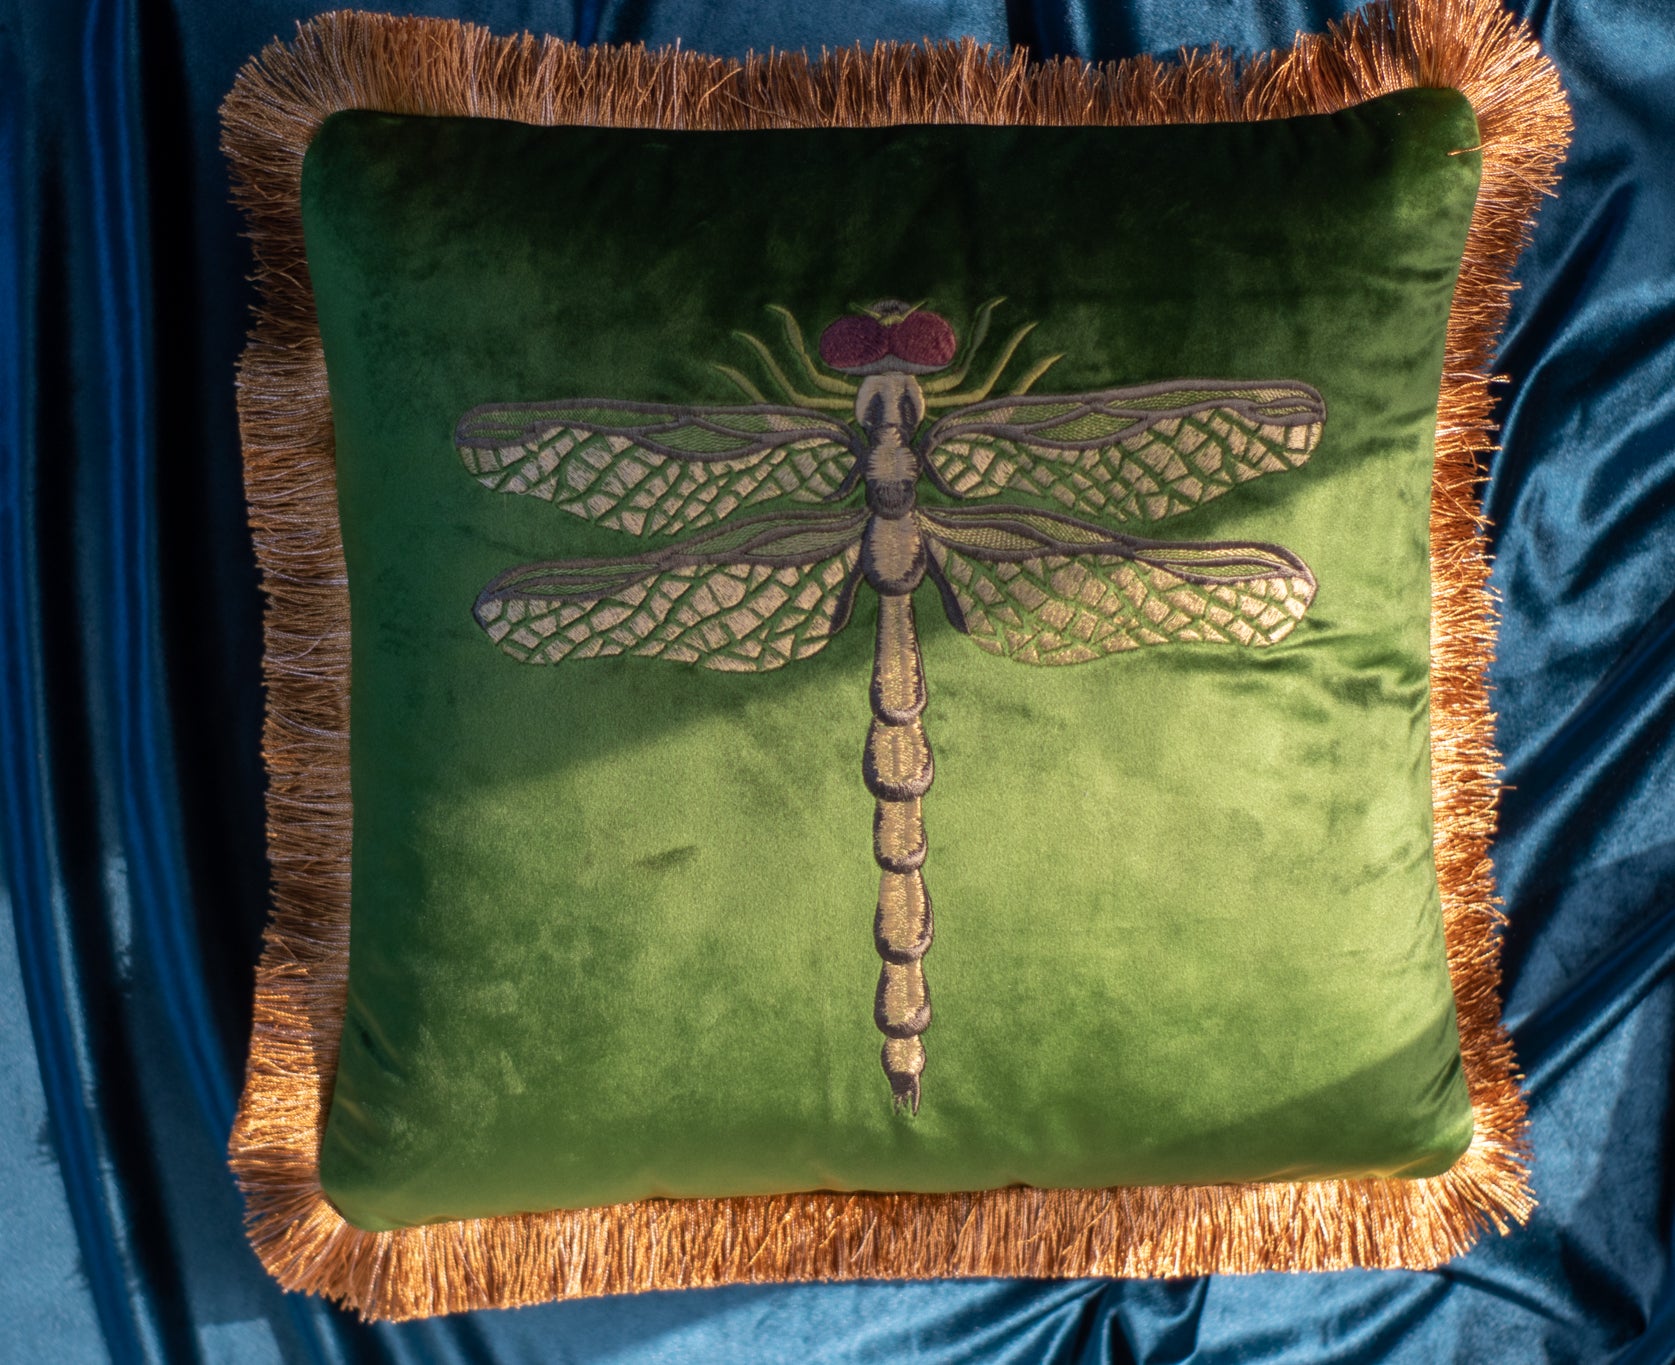 Velvet Cushion Cover Modern Dragonfly Embroidery Decorative Pillow Home Decor Throw Pillow for Sofa Chair Living Room 45x45 cm 18x18 In